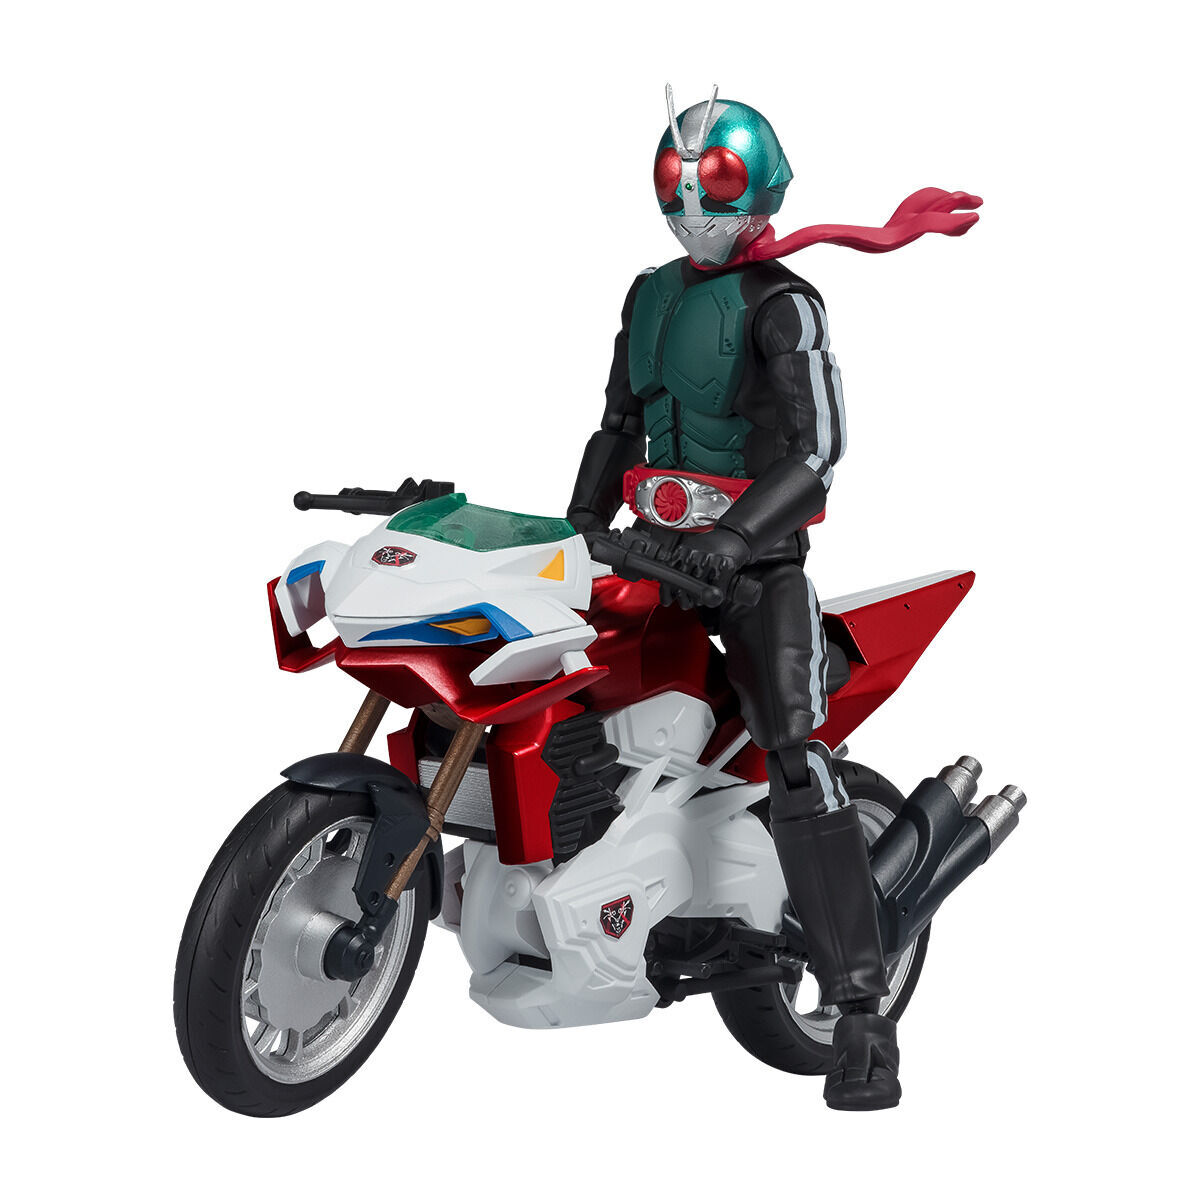 s.h.figuarts シン・仮面ライダー 1号＆2号＆サイクロン号 セット-